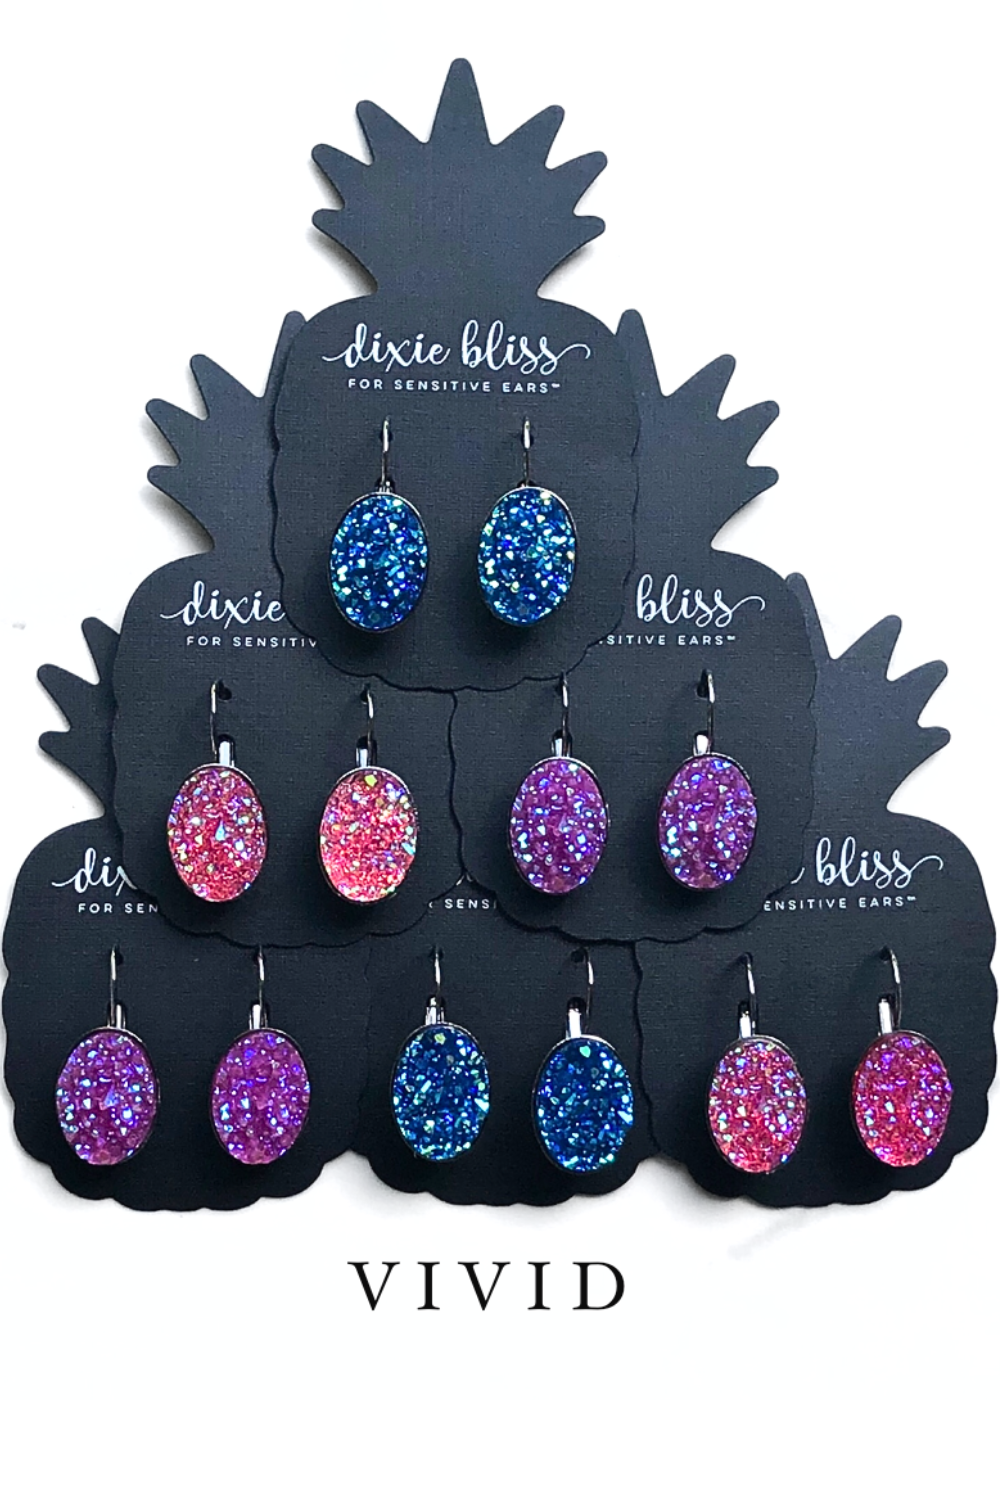 Dixie Bliss Earrings:  Vivid Lever Backs In Blue, Pink, and Purple. All Hypoallergenic made in the USA woman-owned company druzy shiny diamond-like sparkle and shine safe & made for sensitive ears